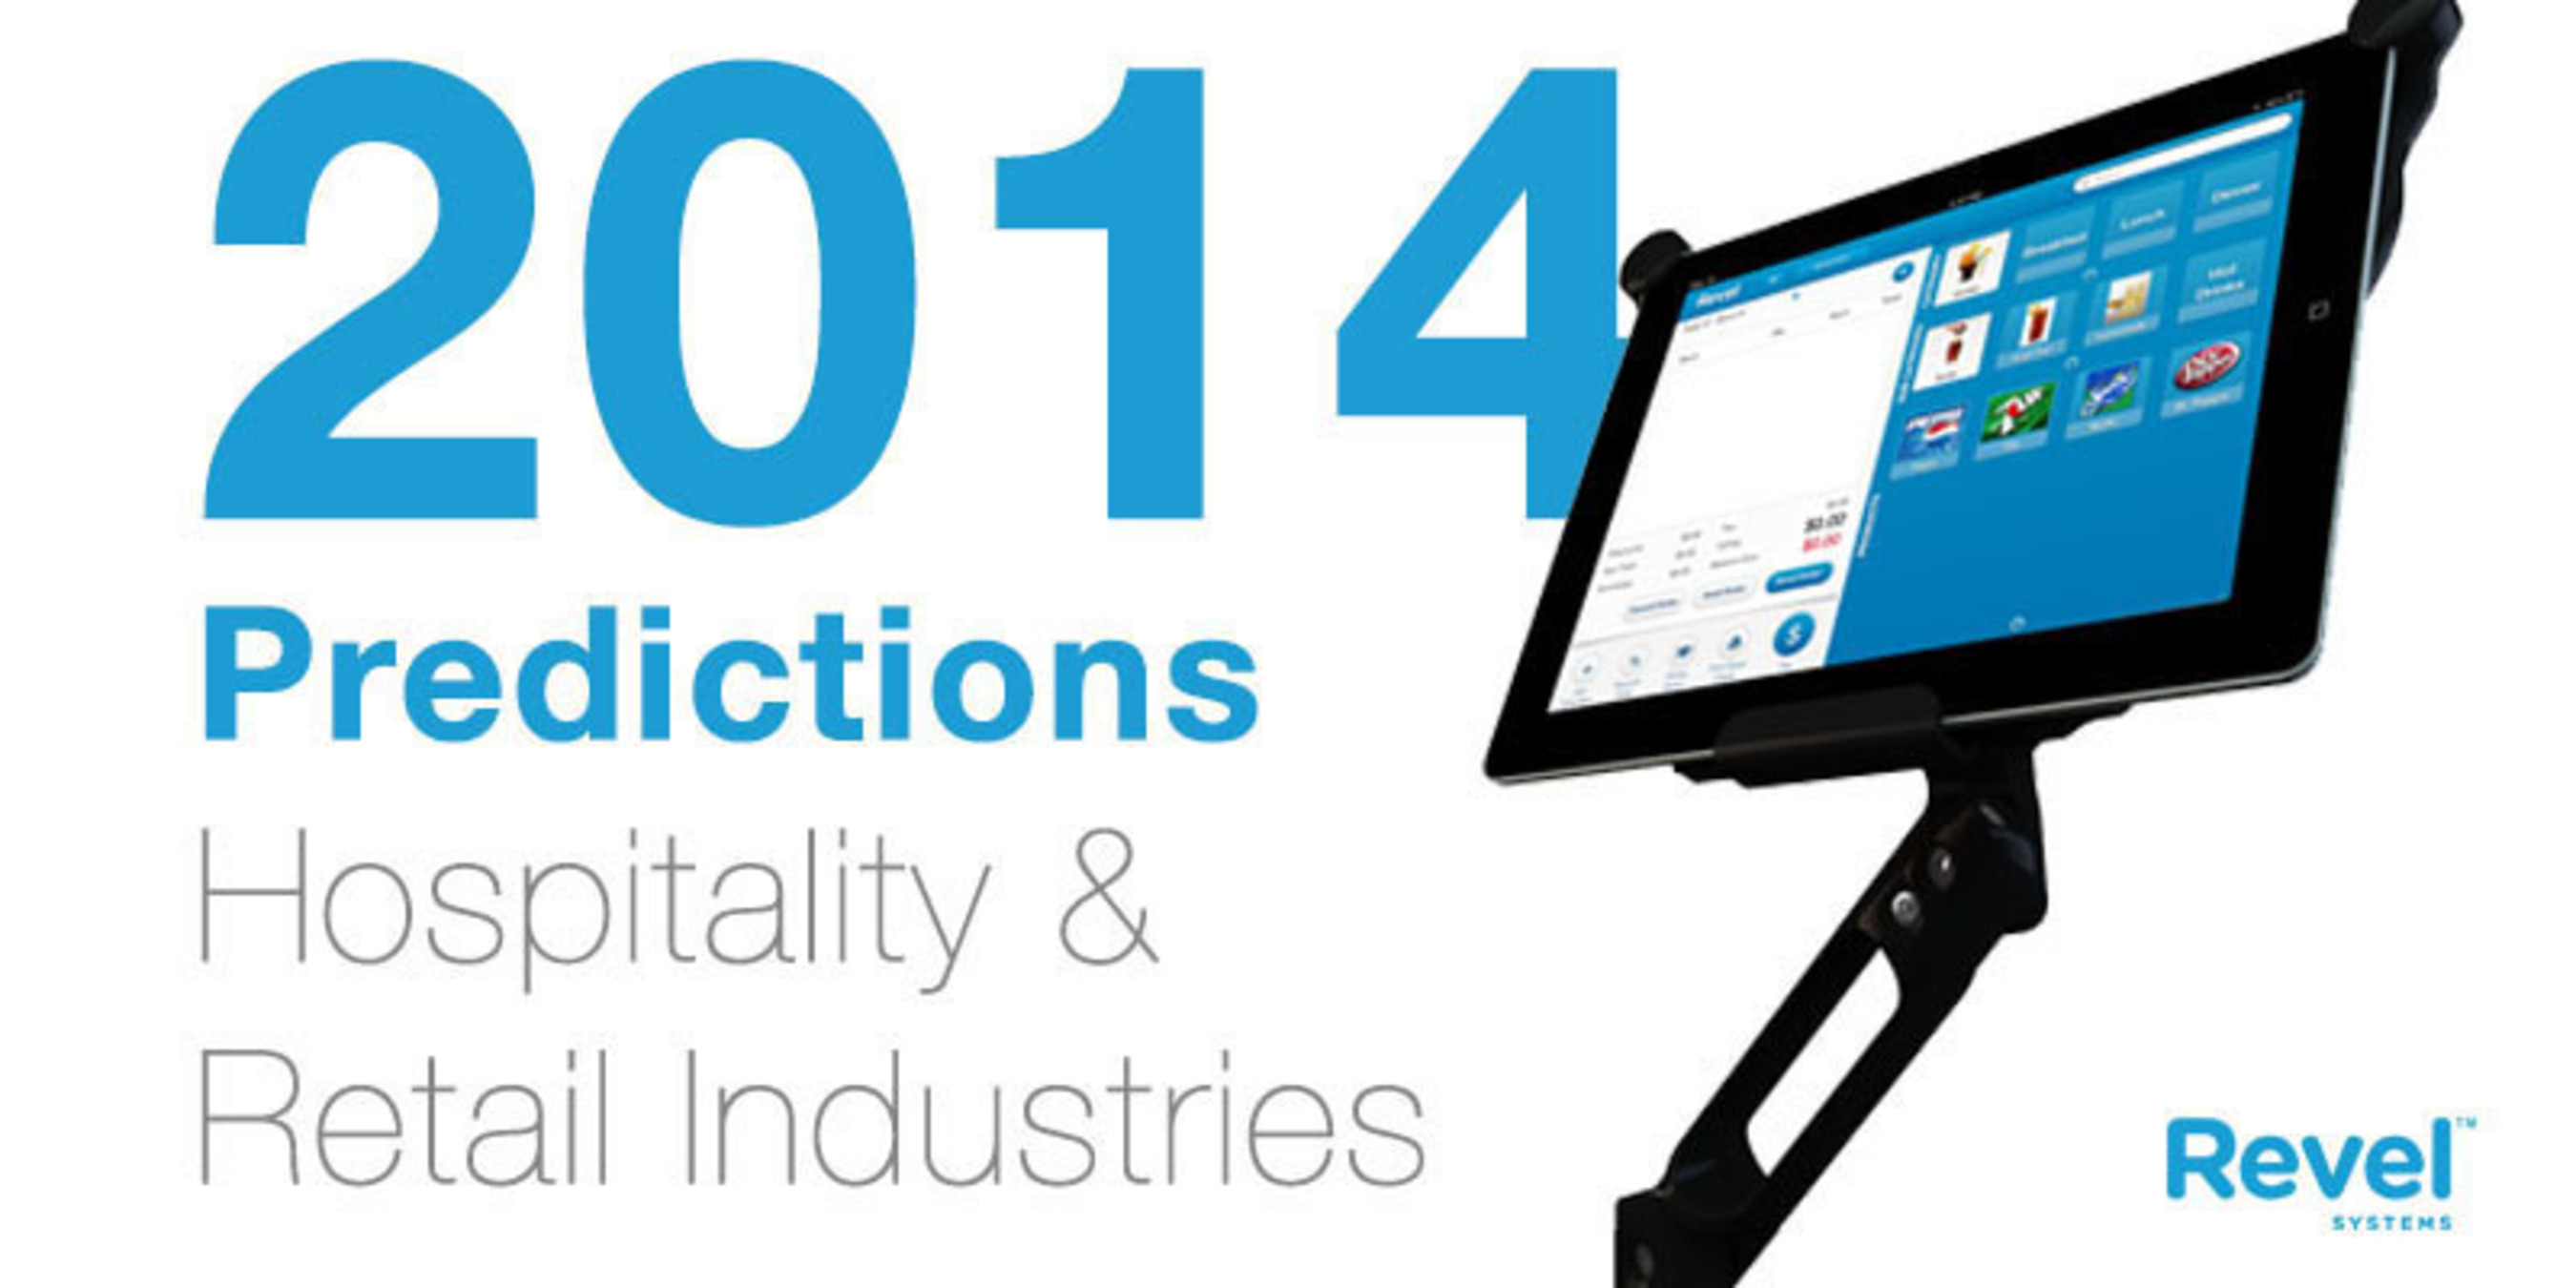 Revel Systems iPad POS Unveils Top Industry Predictions for 2014. (PRNewsFoto/Revel Systems) (PRNewsFoto/REVEL SYSTEMS)